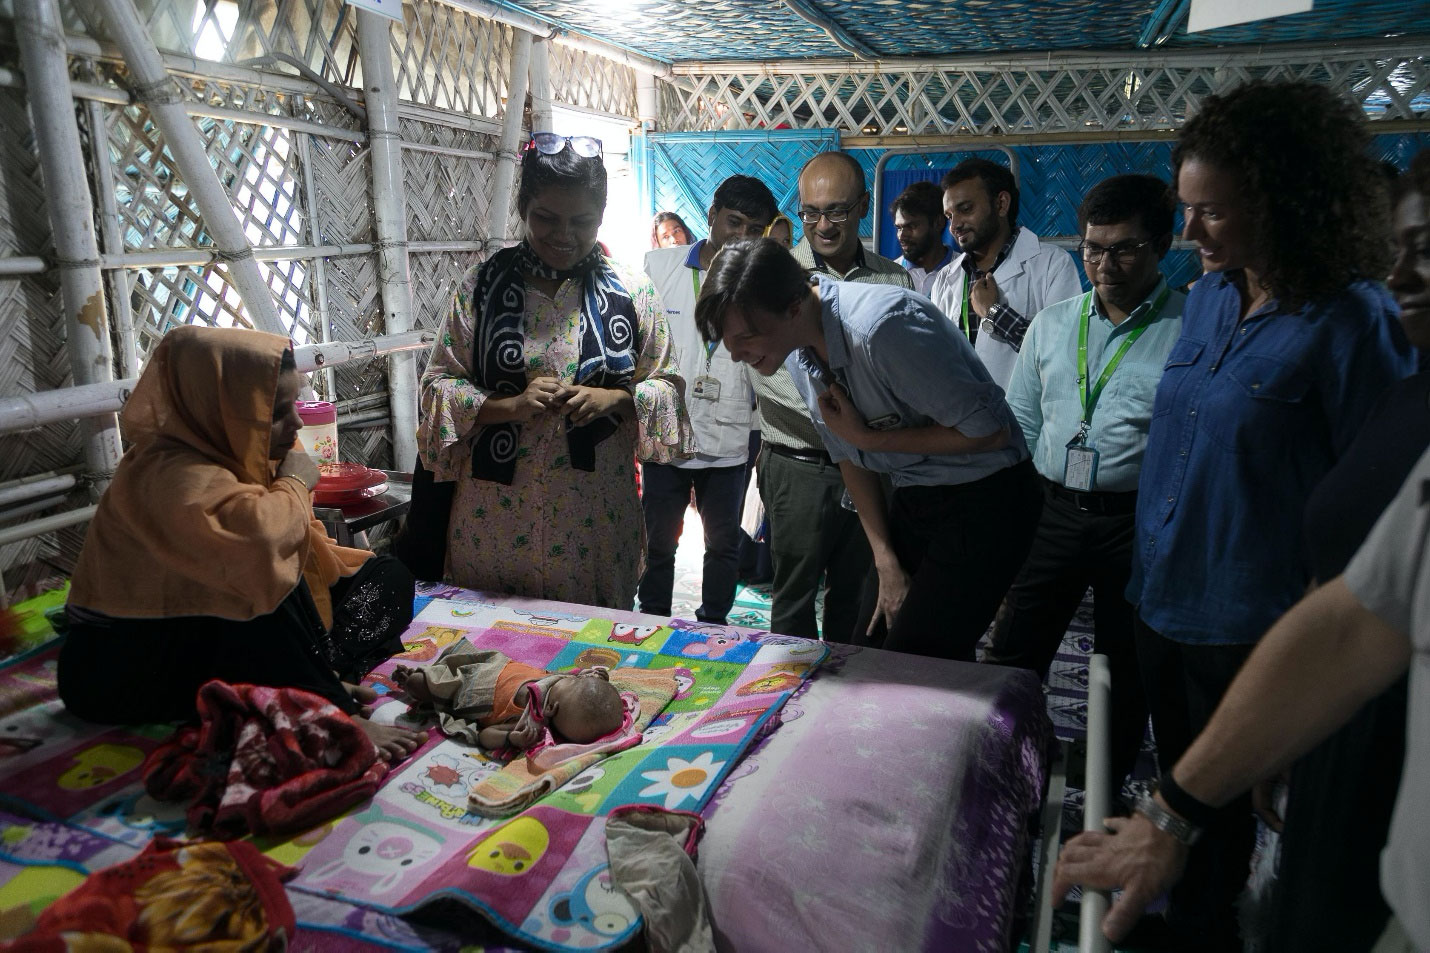 People standing around a mother and her infant on a bed.